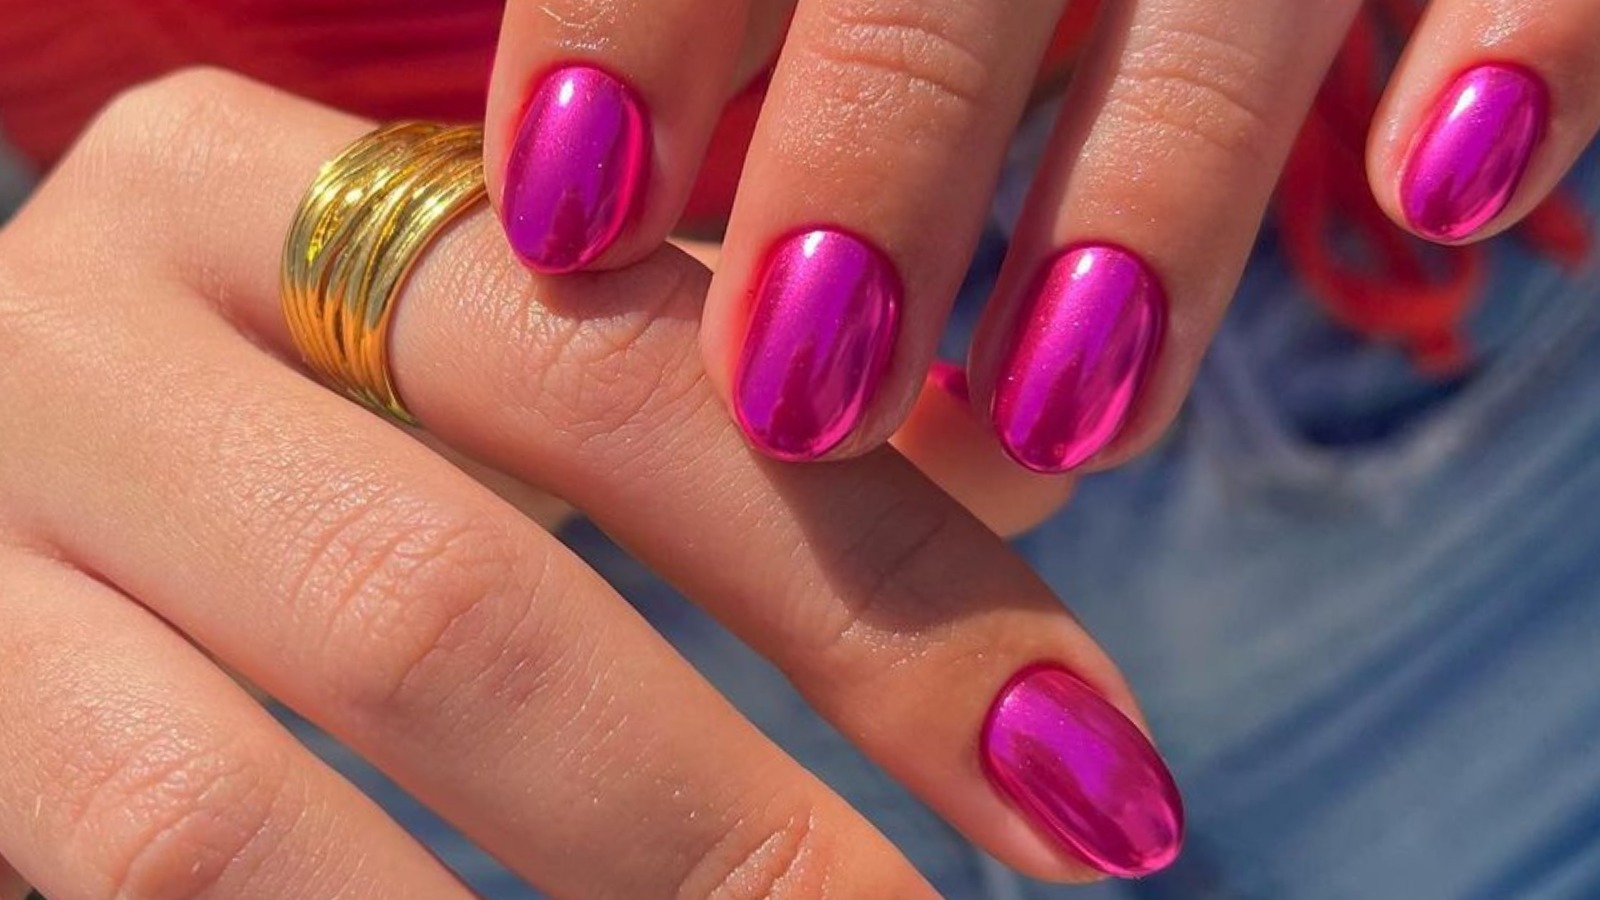 How To Get Chrome Nails So You Can Have The Most BA Manicure Ever — VIDEOS